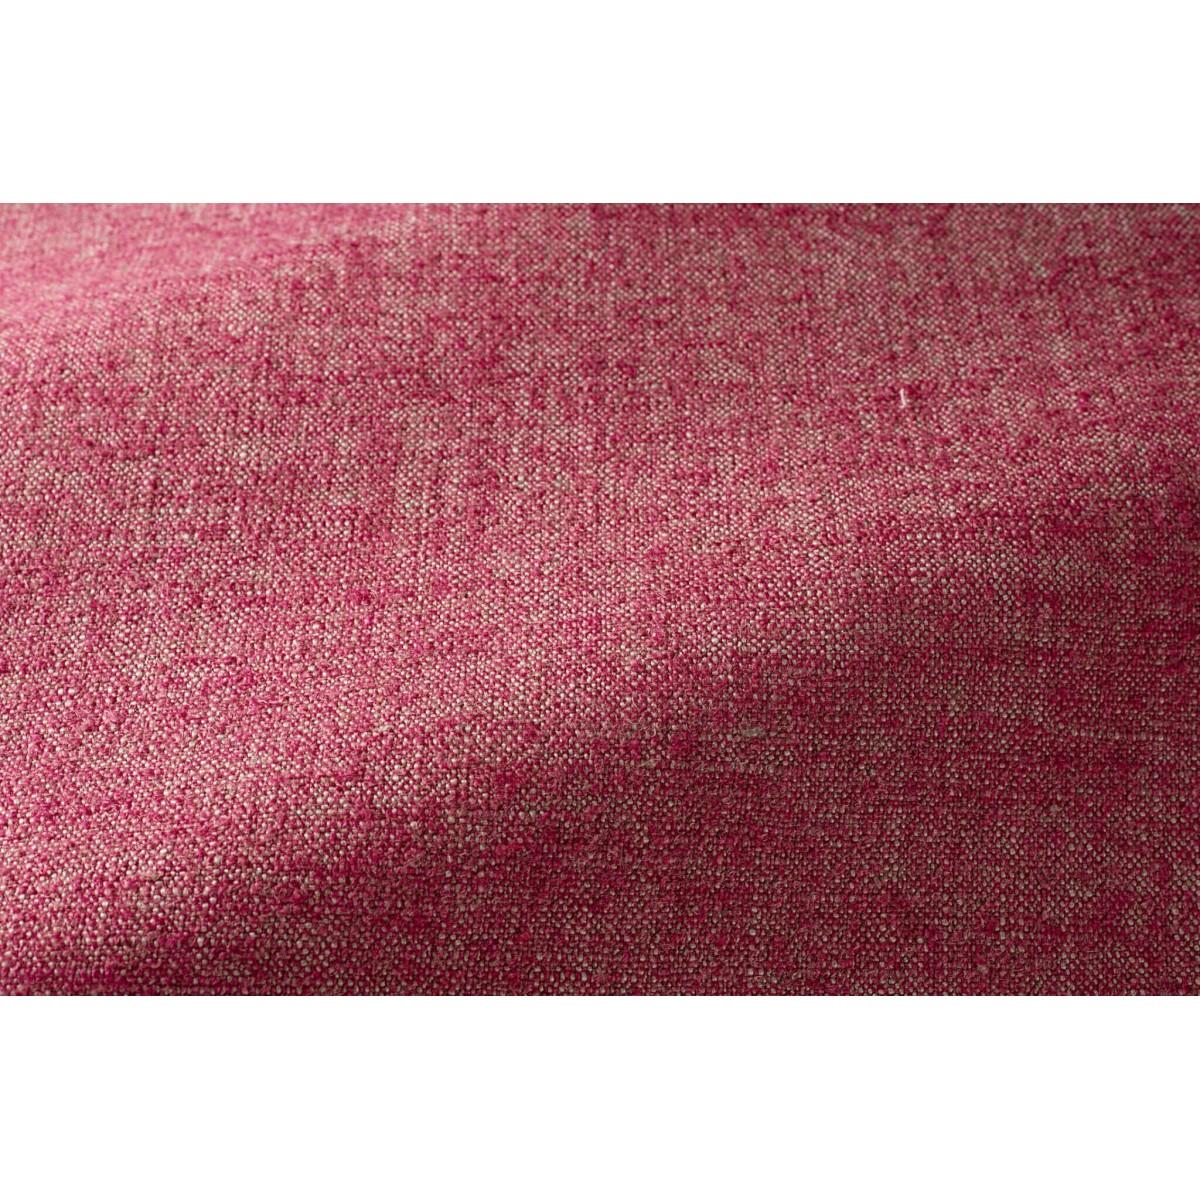 Popus Editions Giovanna 2.5 seater sofa in Fuschia London Linen Fabric

Giovanna is a sofa with a strong profile. A sober, plush line, with this famous detail that changes everything, so as not to forget its strength of character and this charming